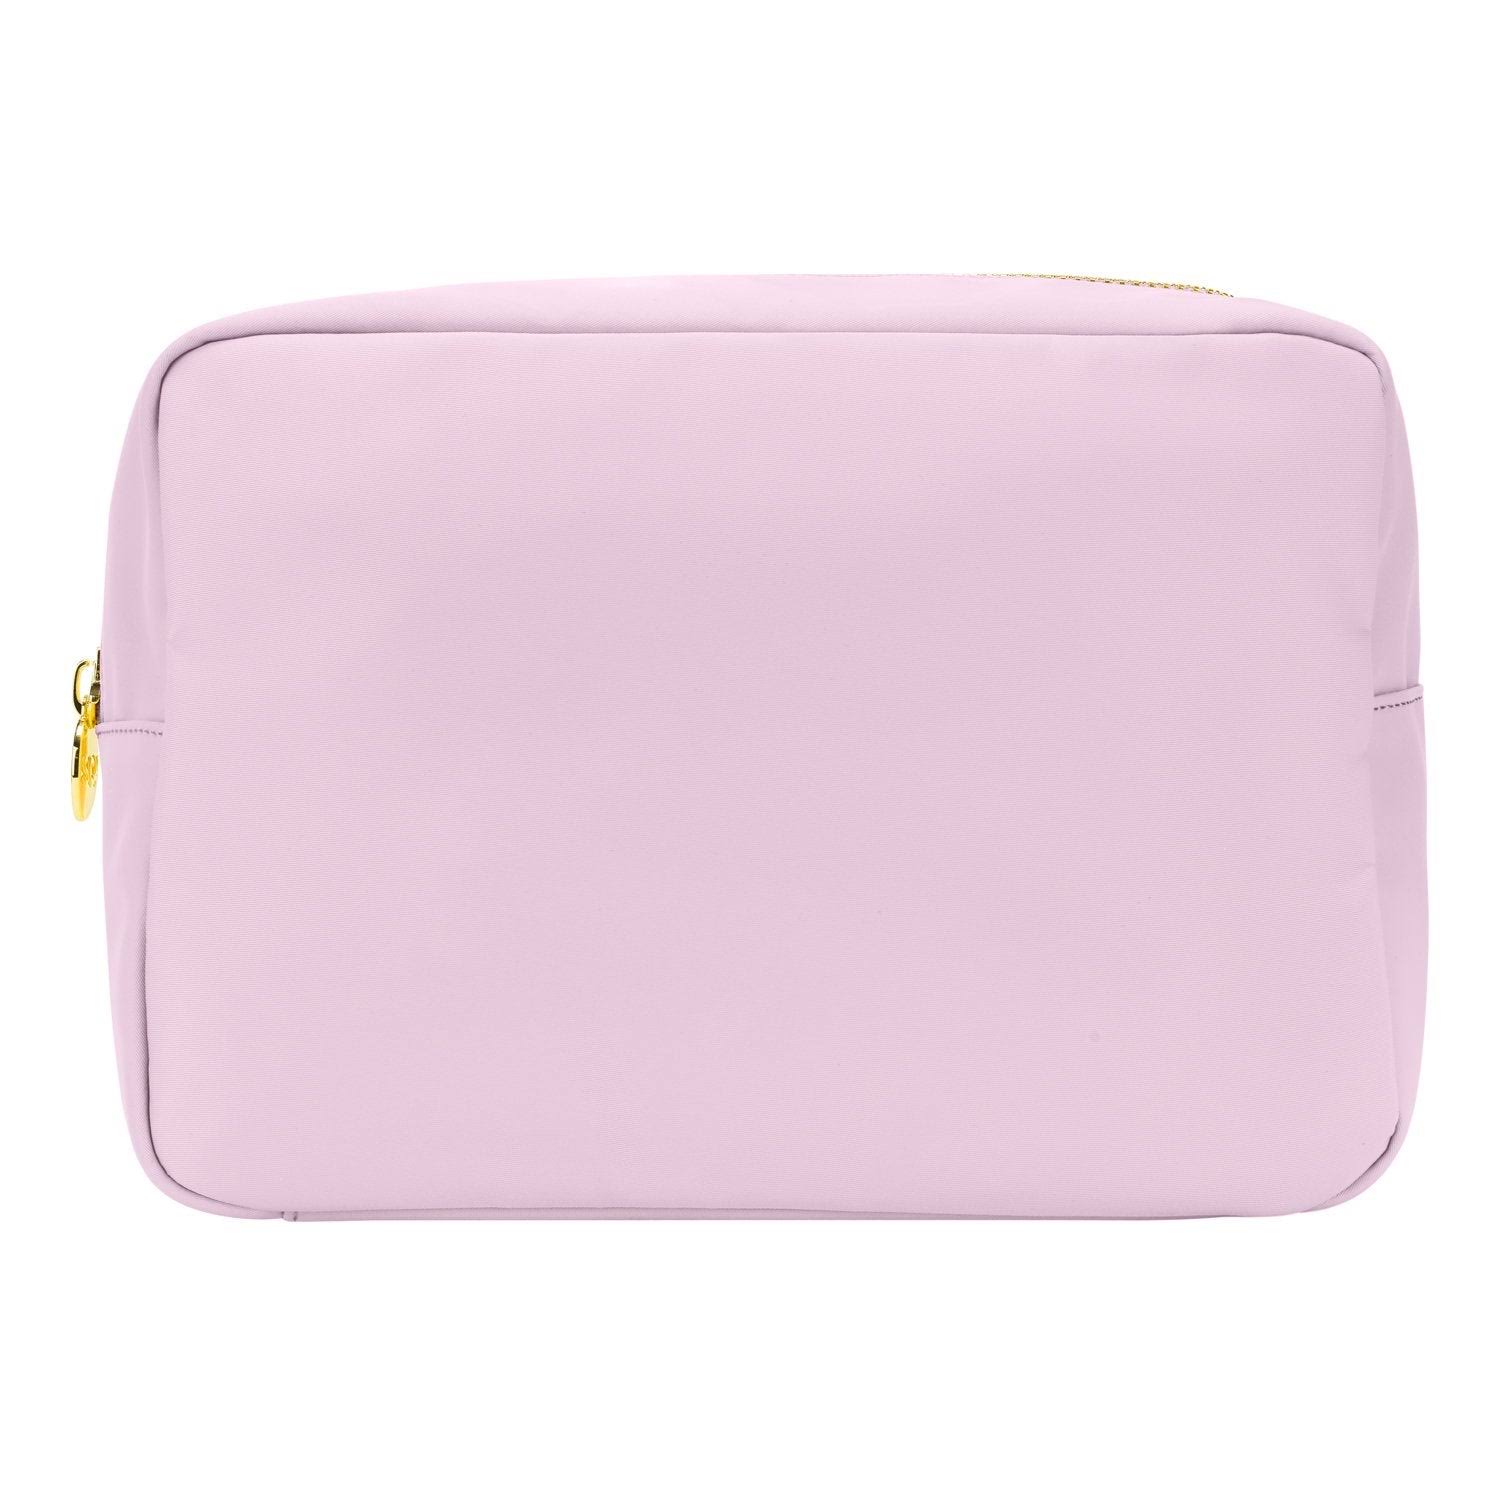 Stoney Clover Lane Classic Large Pouch in Lilac - Purple. Size all.